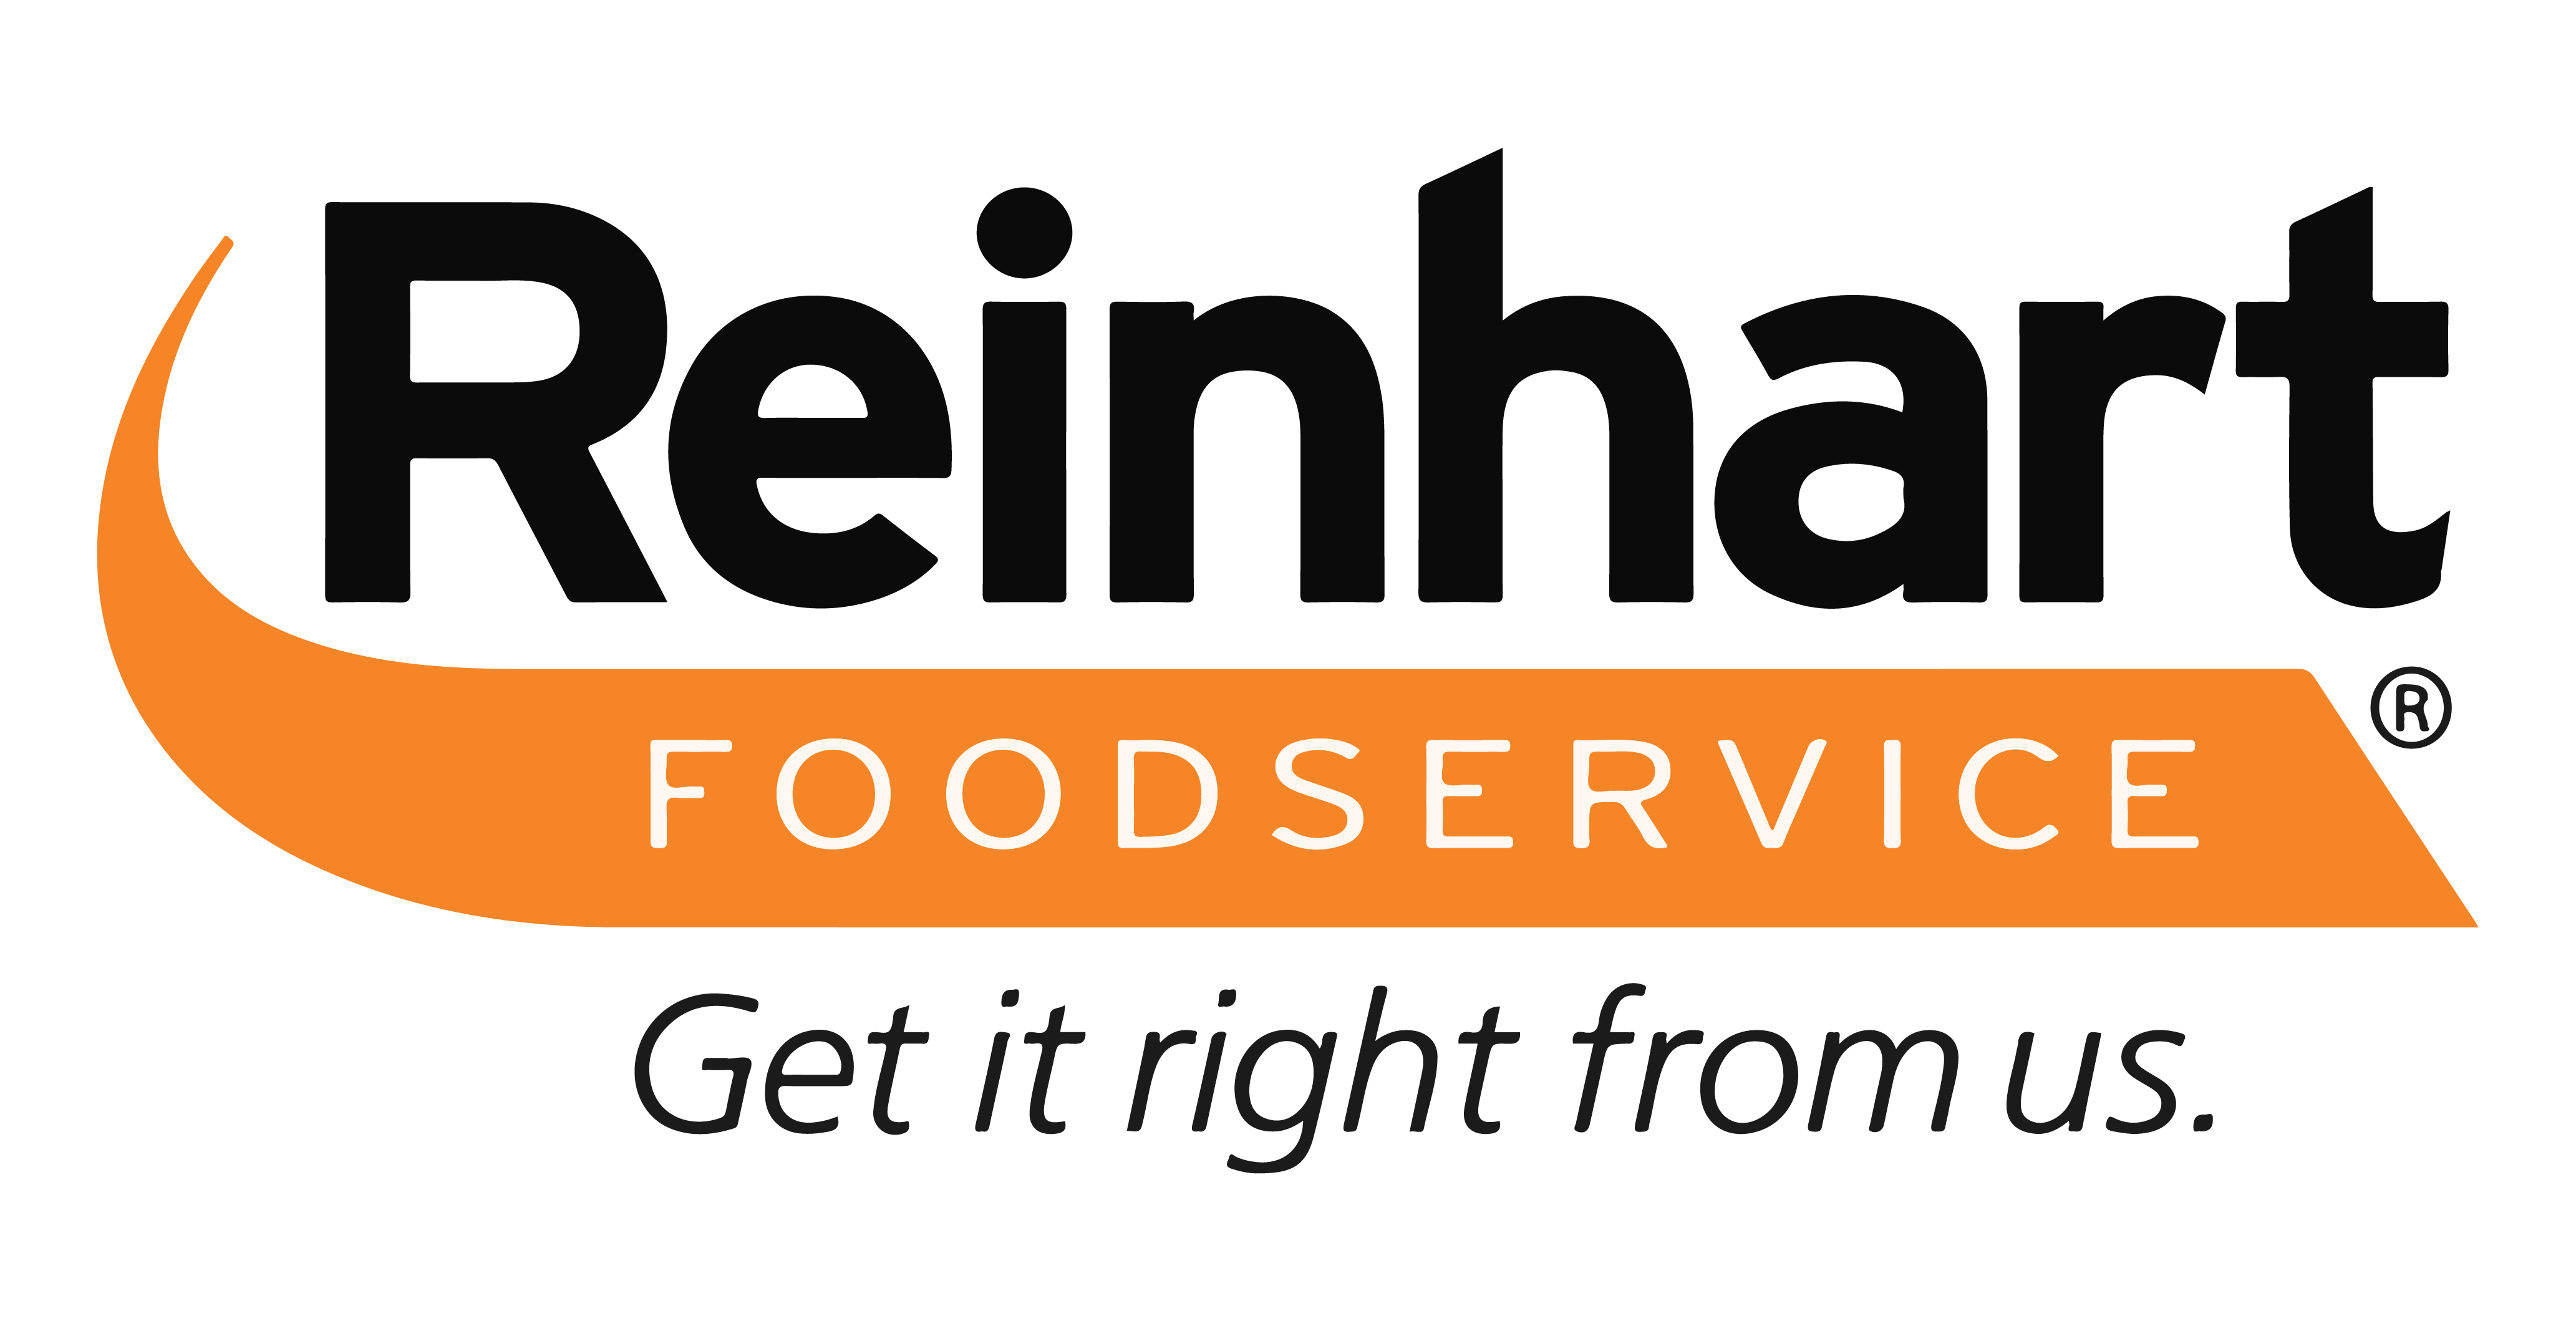 Reinhart Foodservice — The Best and Brightest